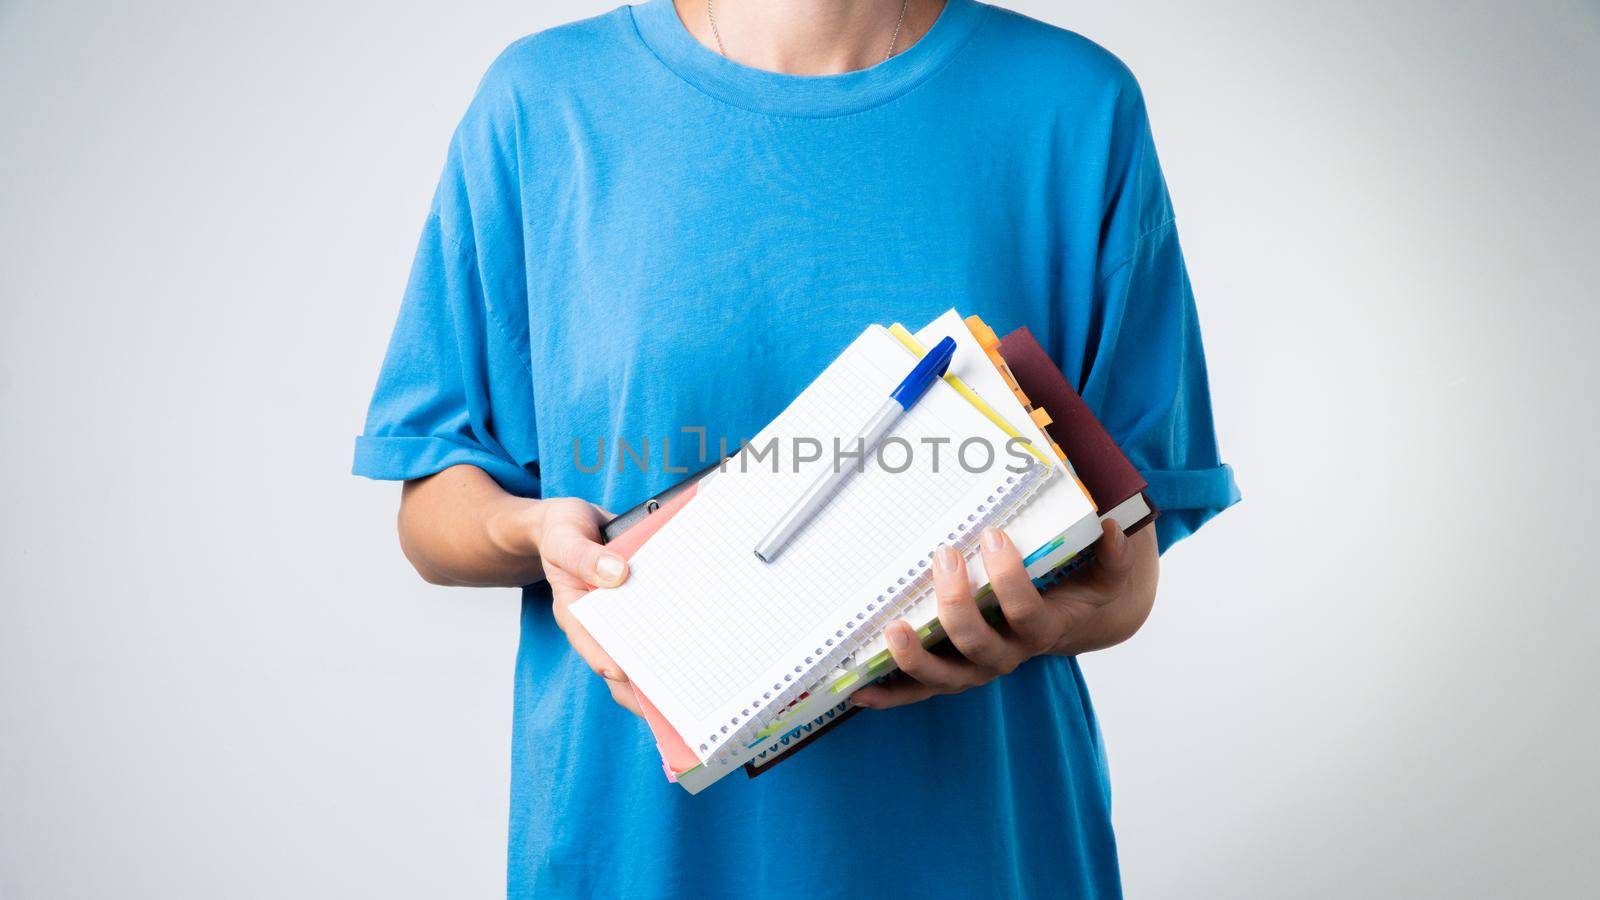 Women's hands hold notebooks, notepads, textbooks, books and a pen for studying by voktybre